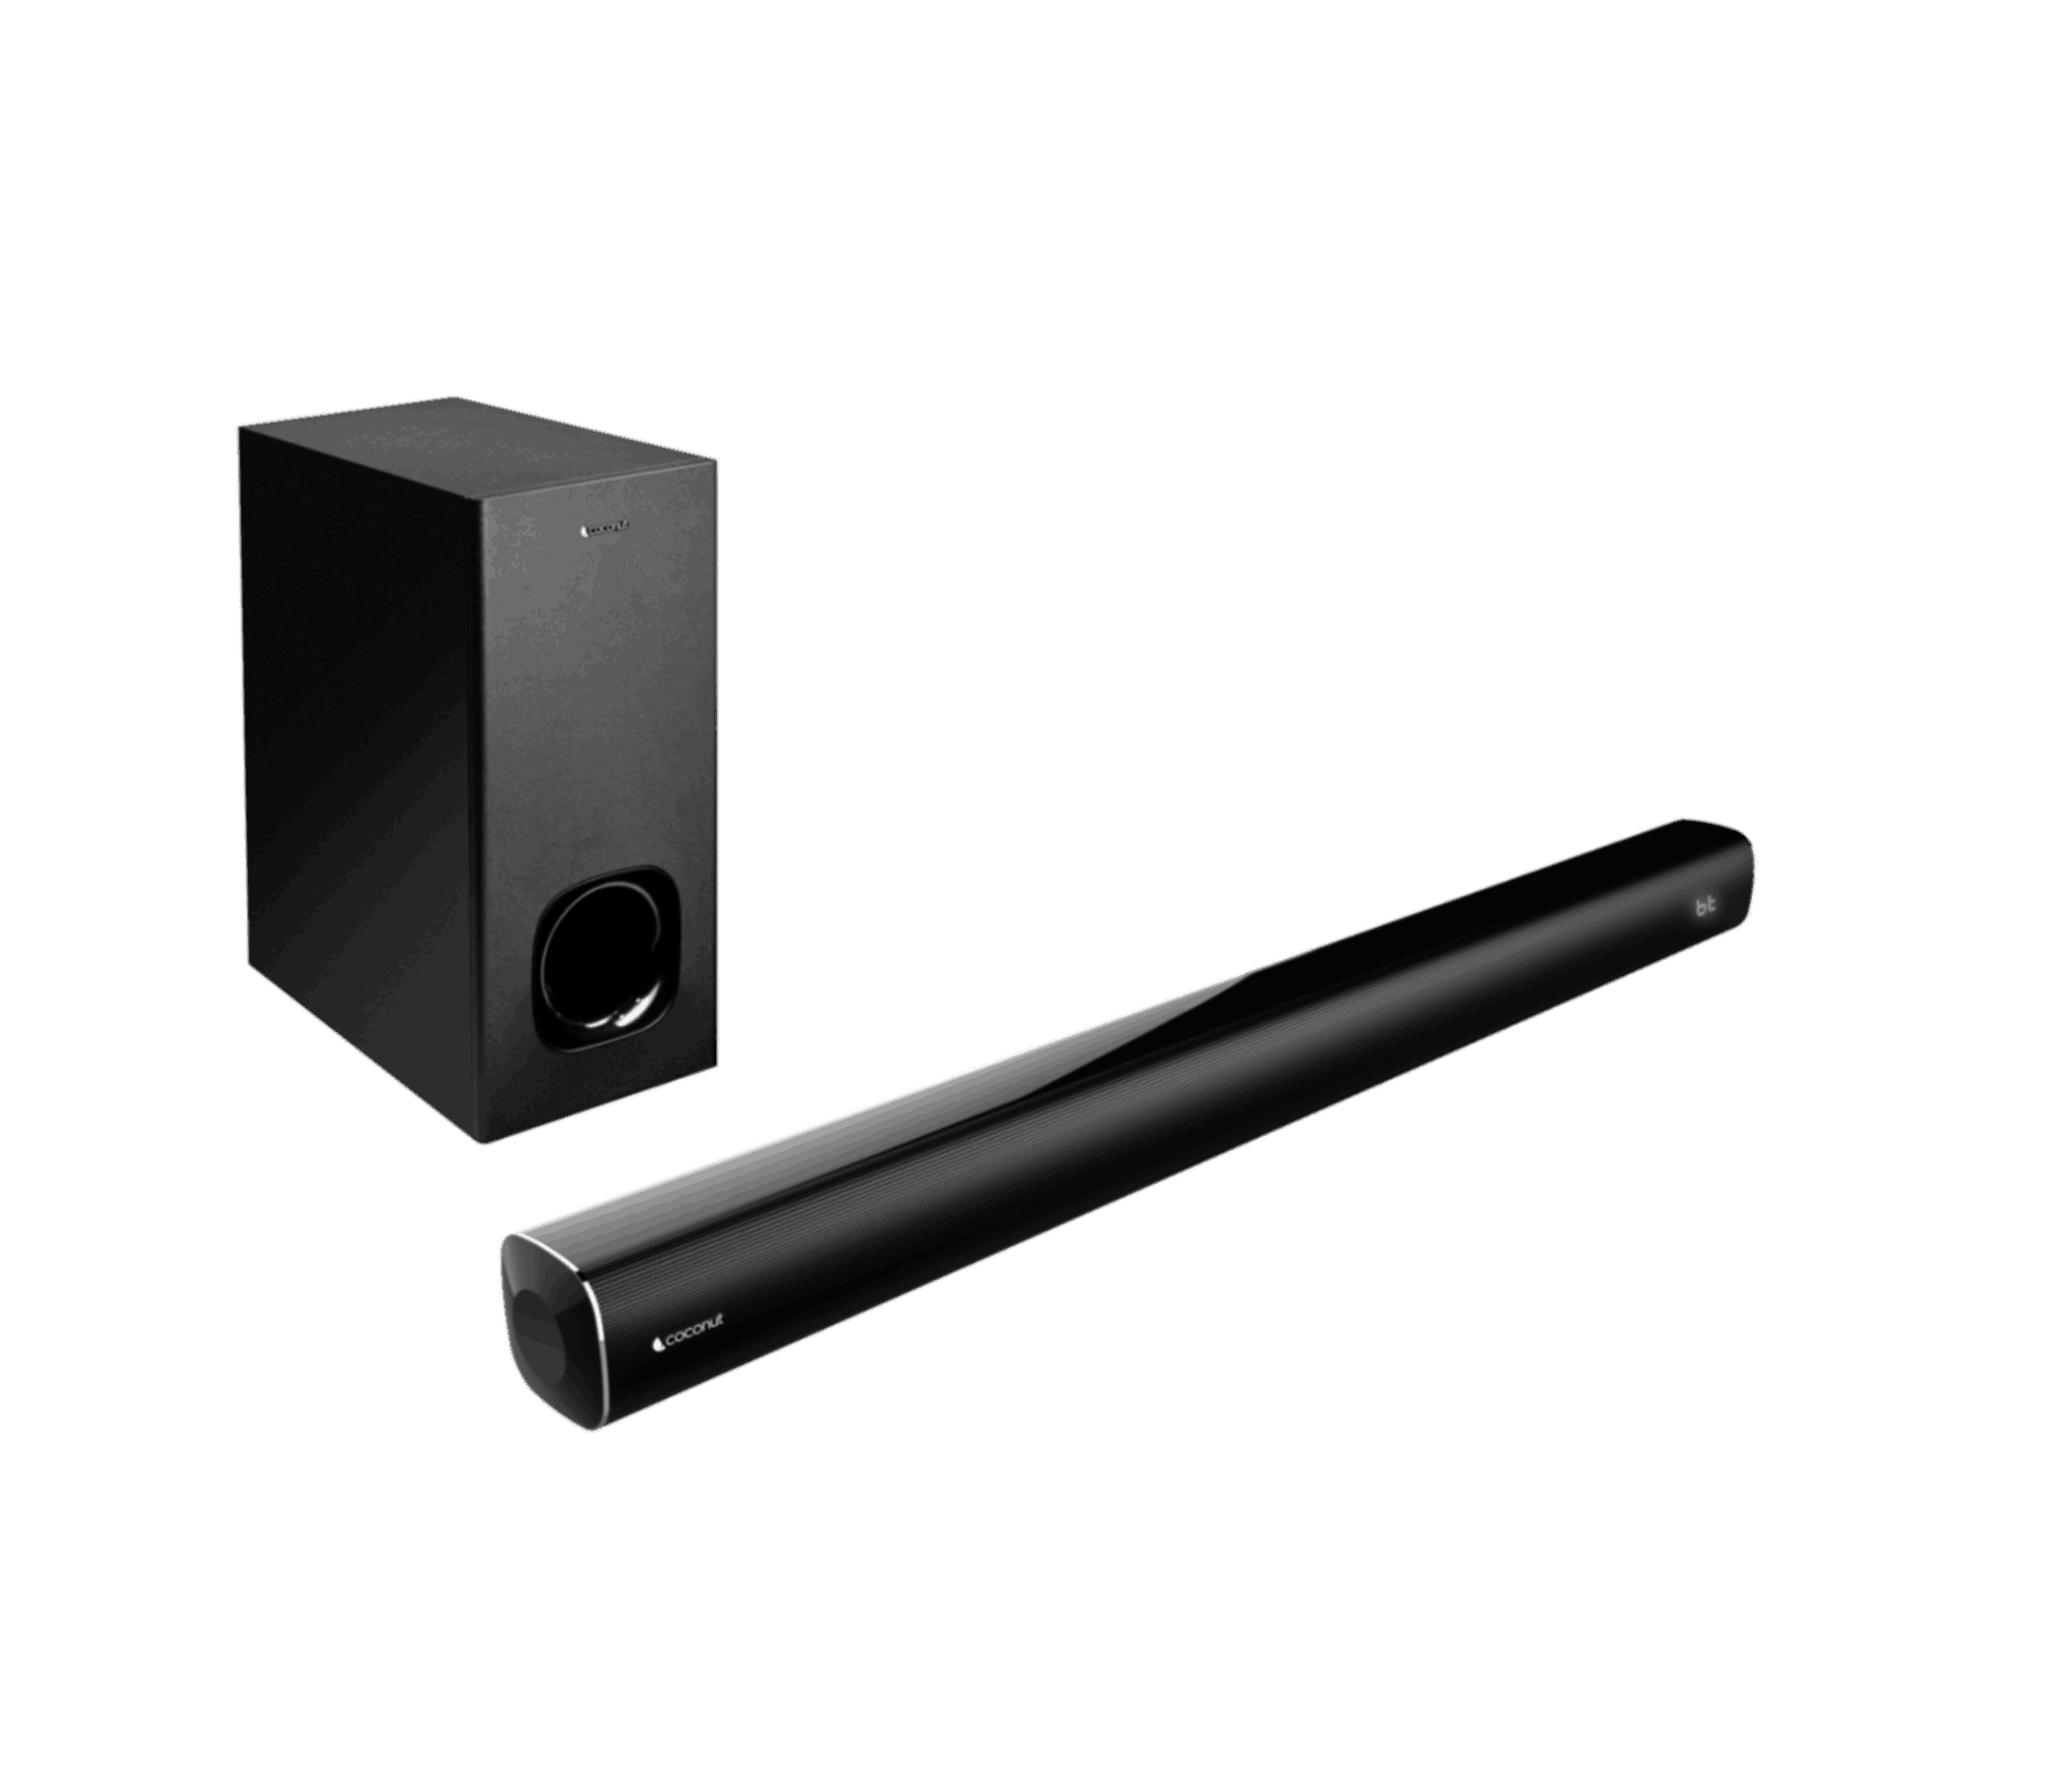 Walton 160W Wireless Sound Bar with Subwoofer, Multiple Input Connectivity, Loud Speakers